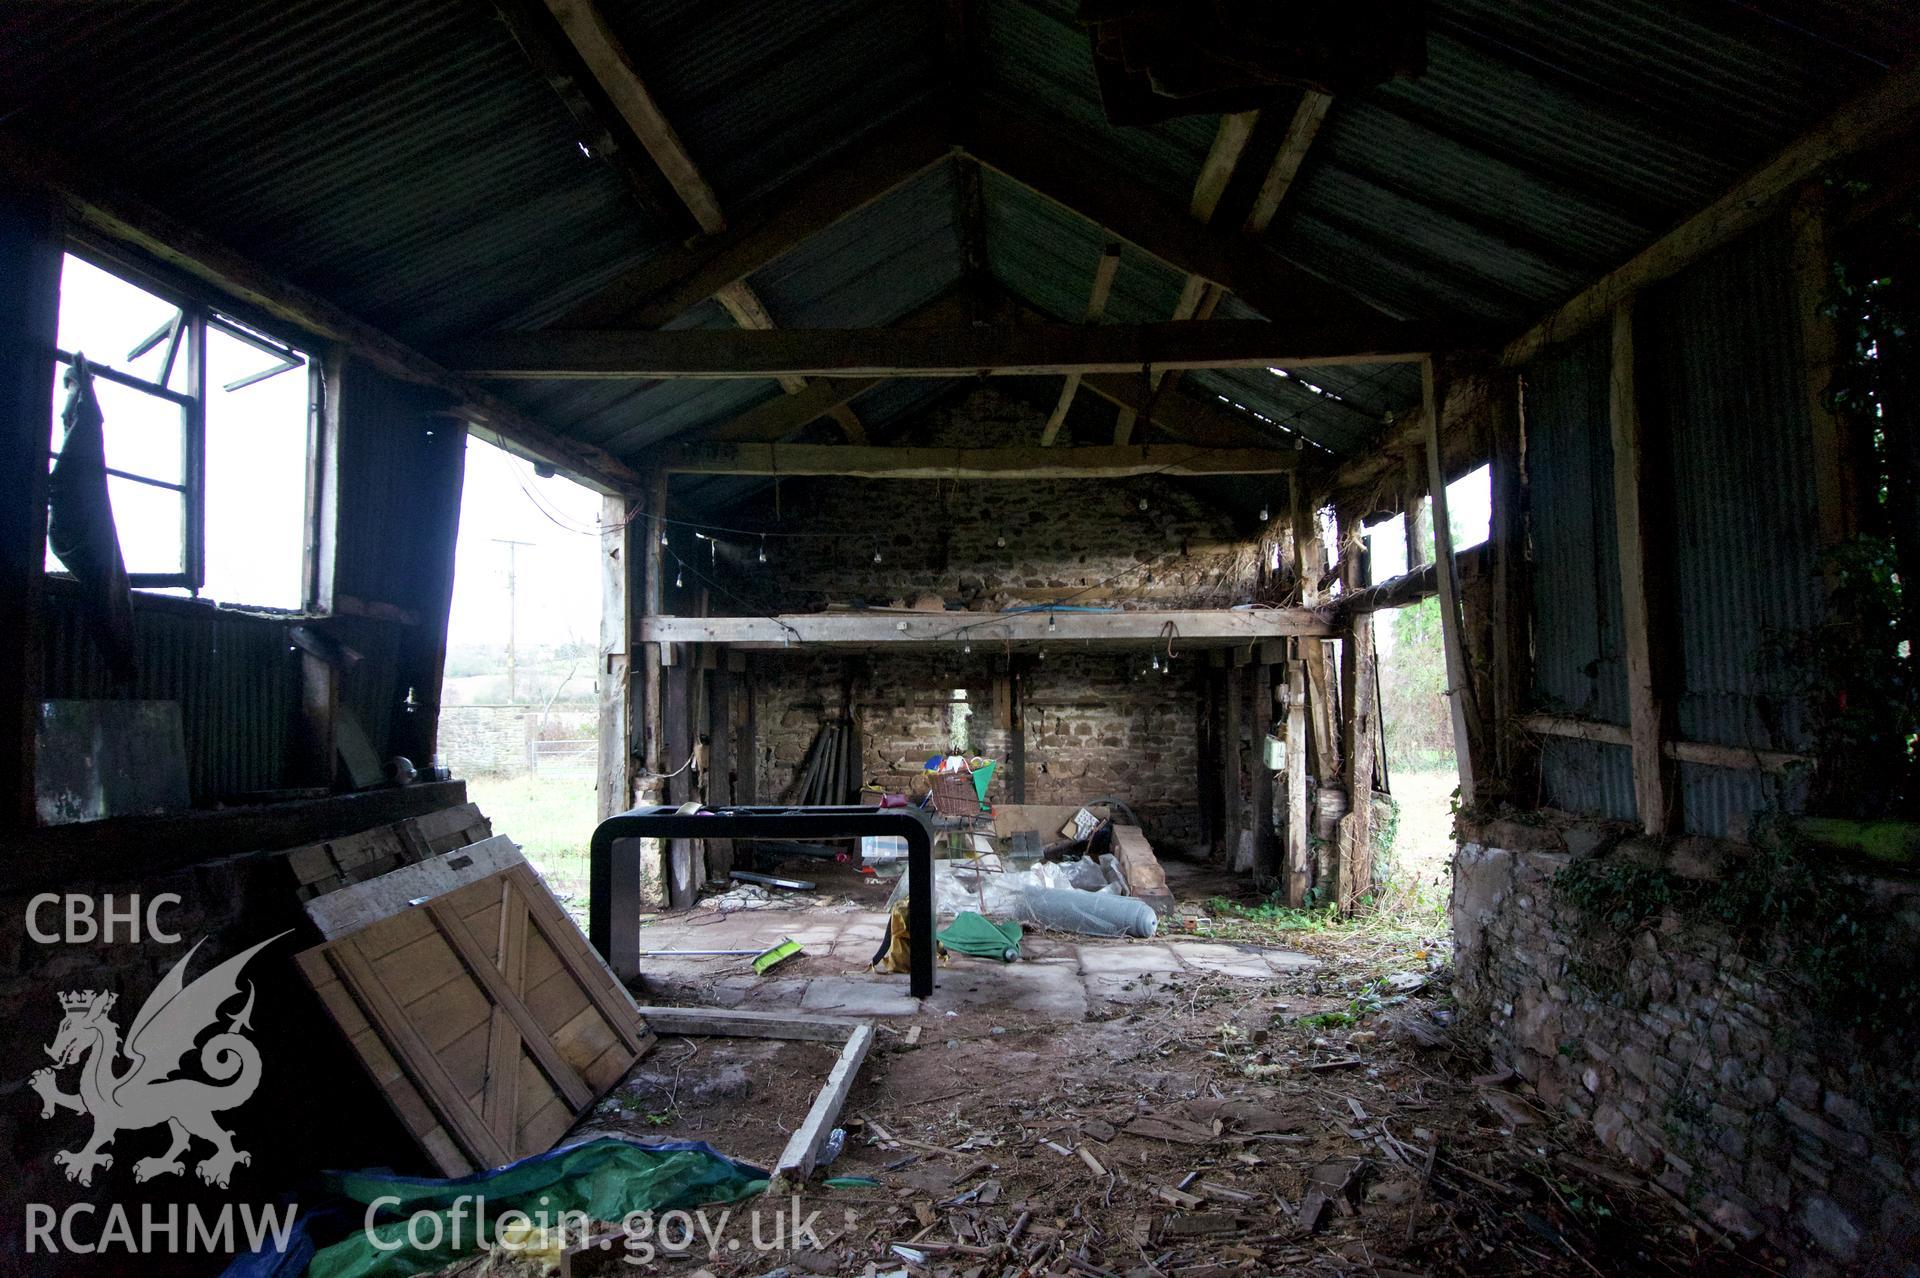 Internal view looking west to east at Middle Ton Threshing Barn. Photographed for the Historic Building Photographic Record of Middle Ton Threshing Barn, Llanvapley, by Dan Courtney of Cog Architects, 2019.